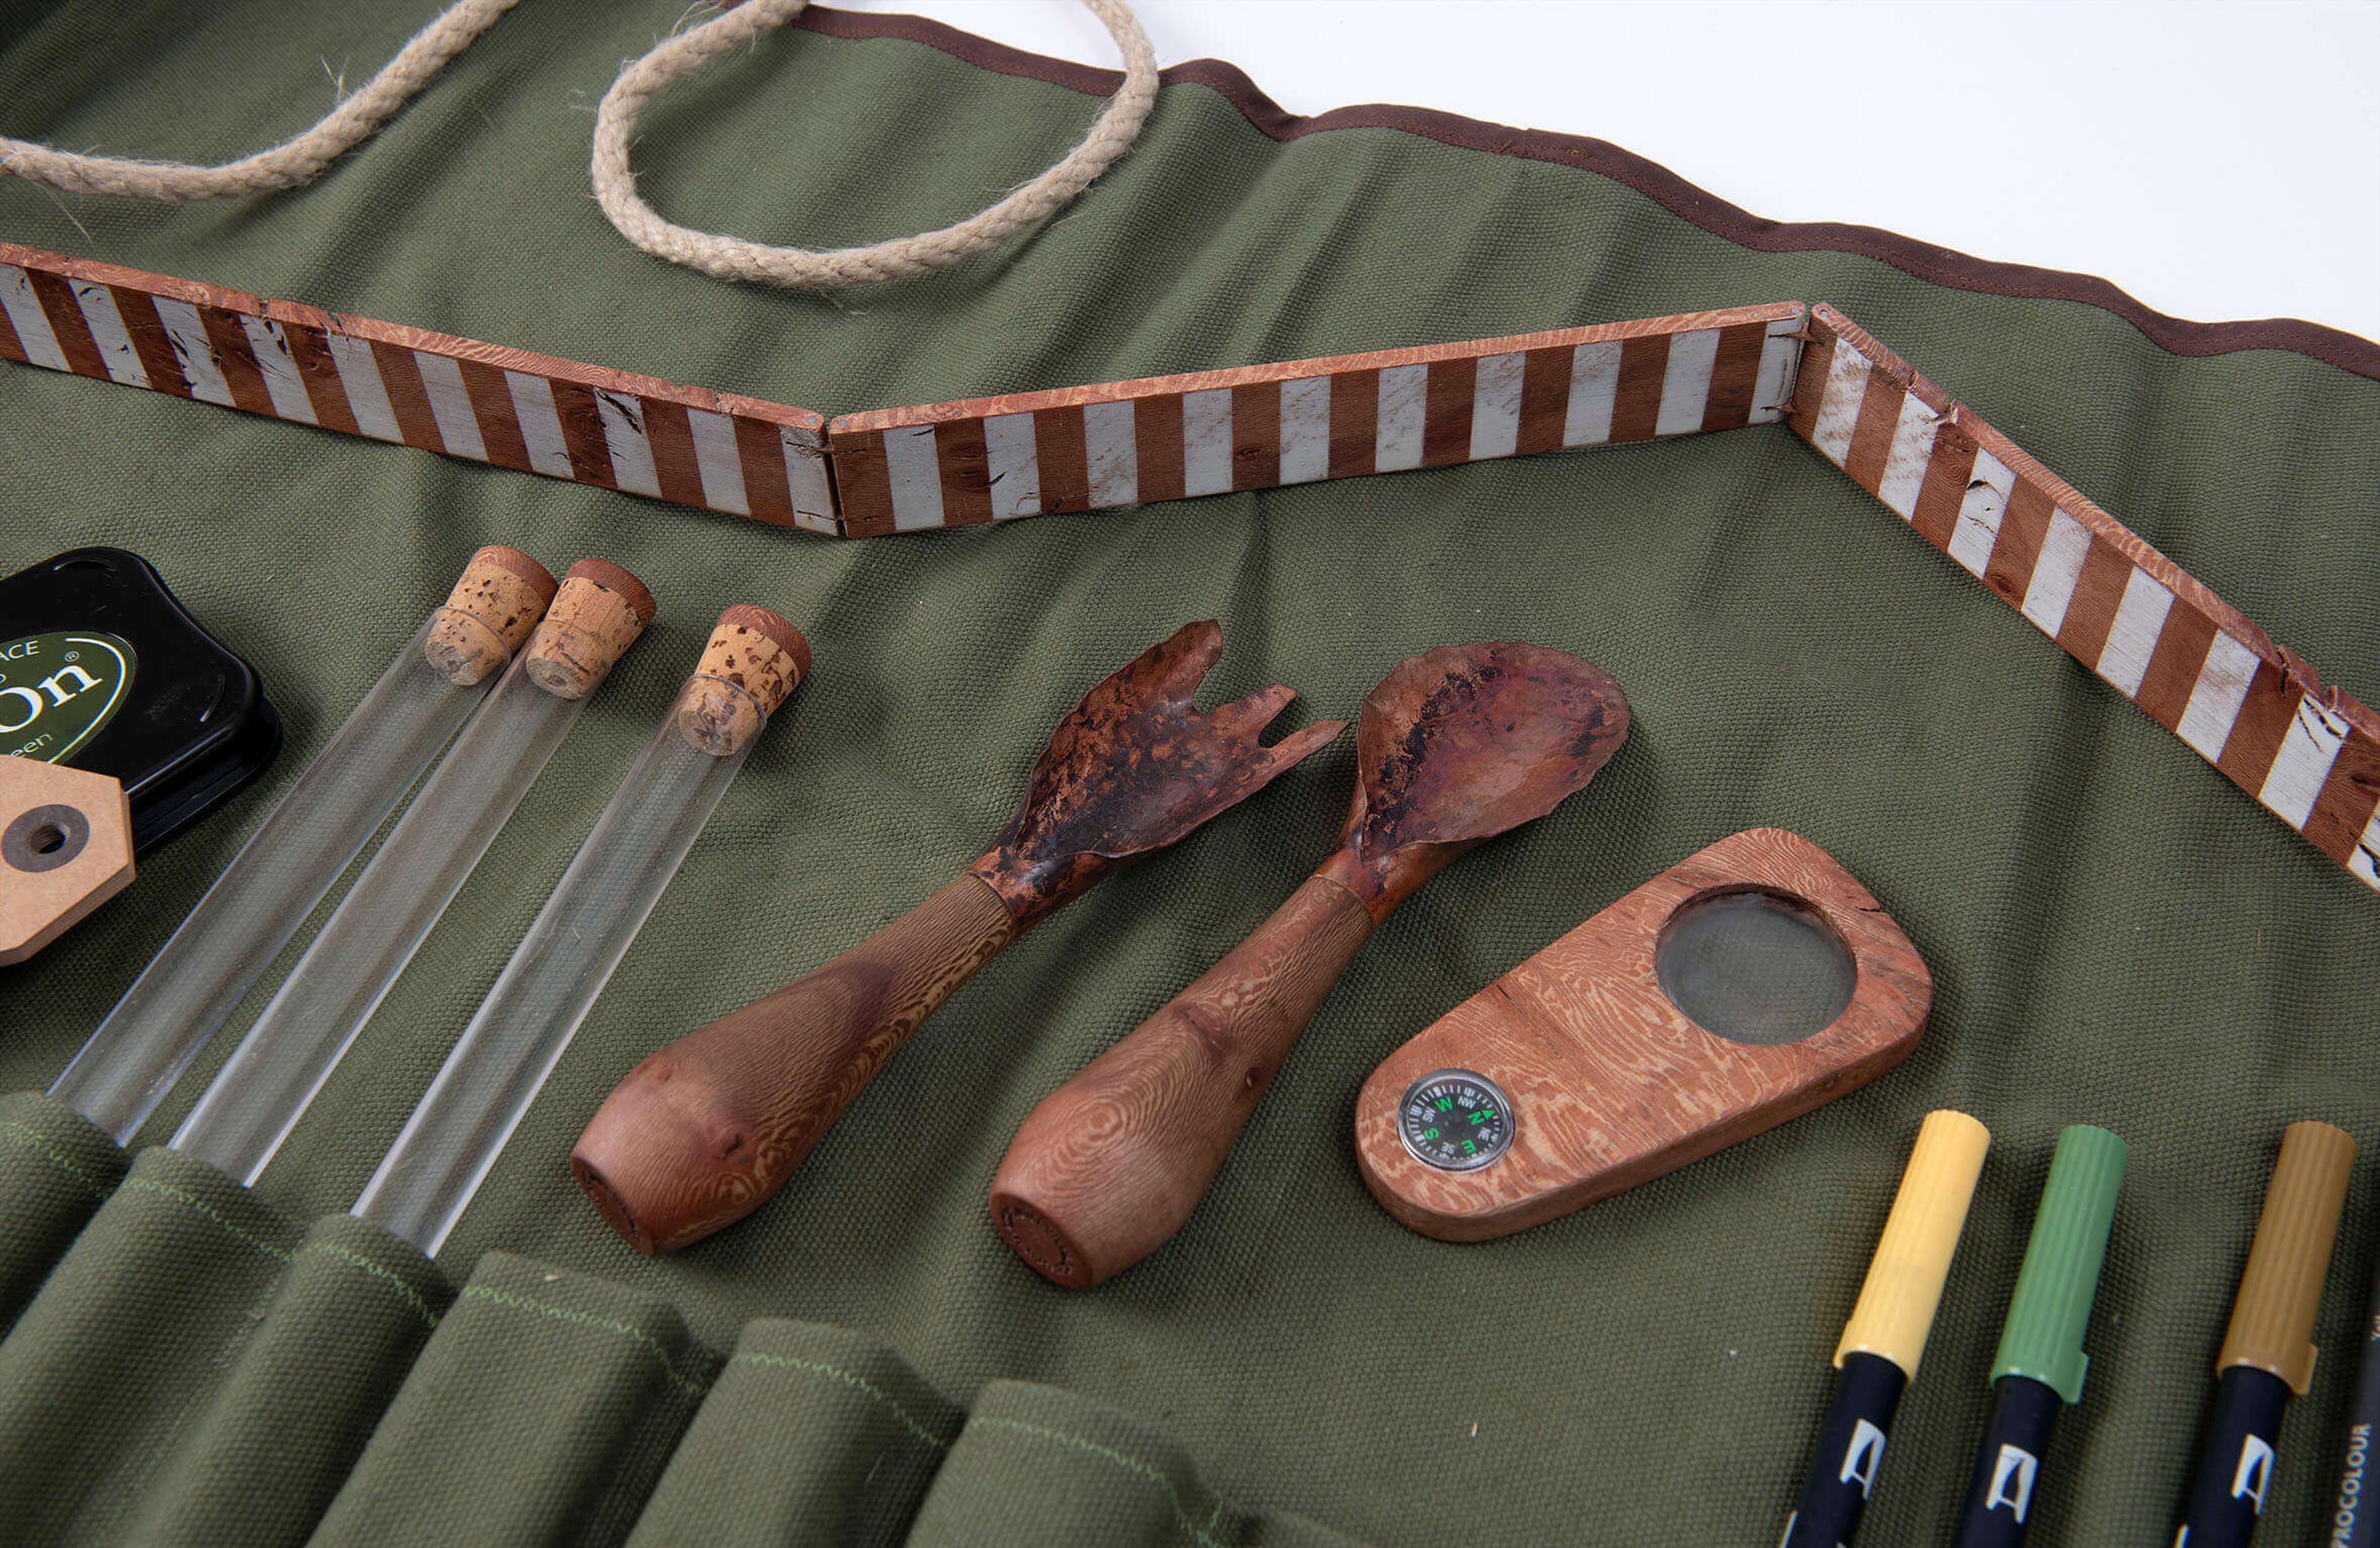 Photograph of a set of tools in a green fabric roll